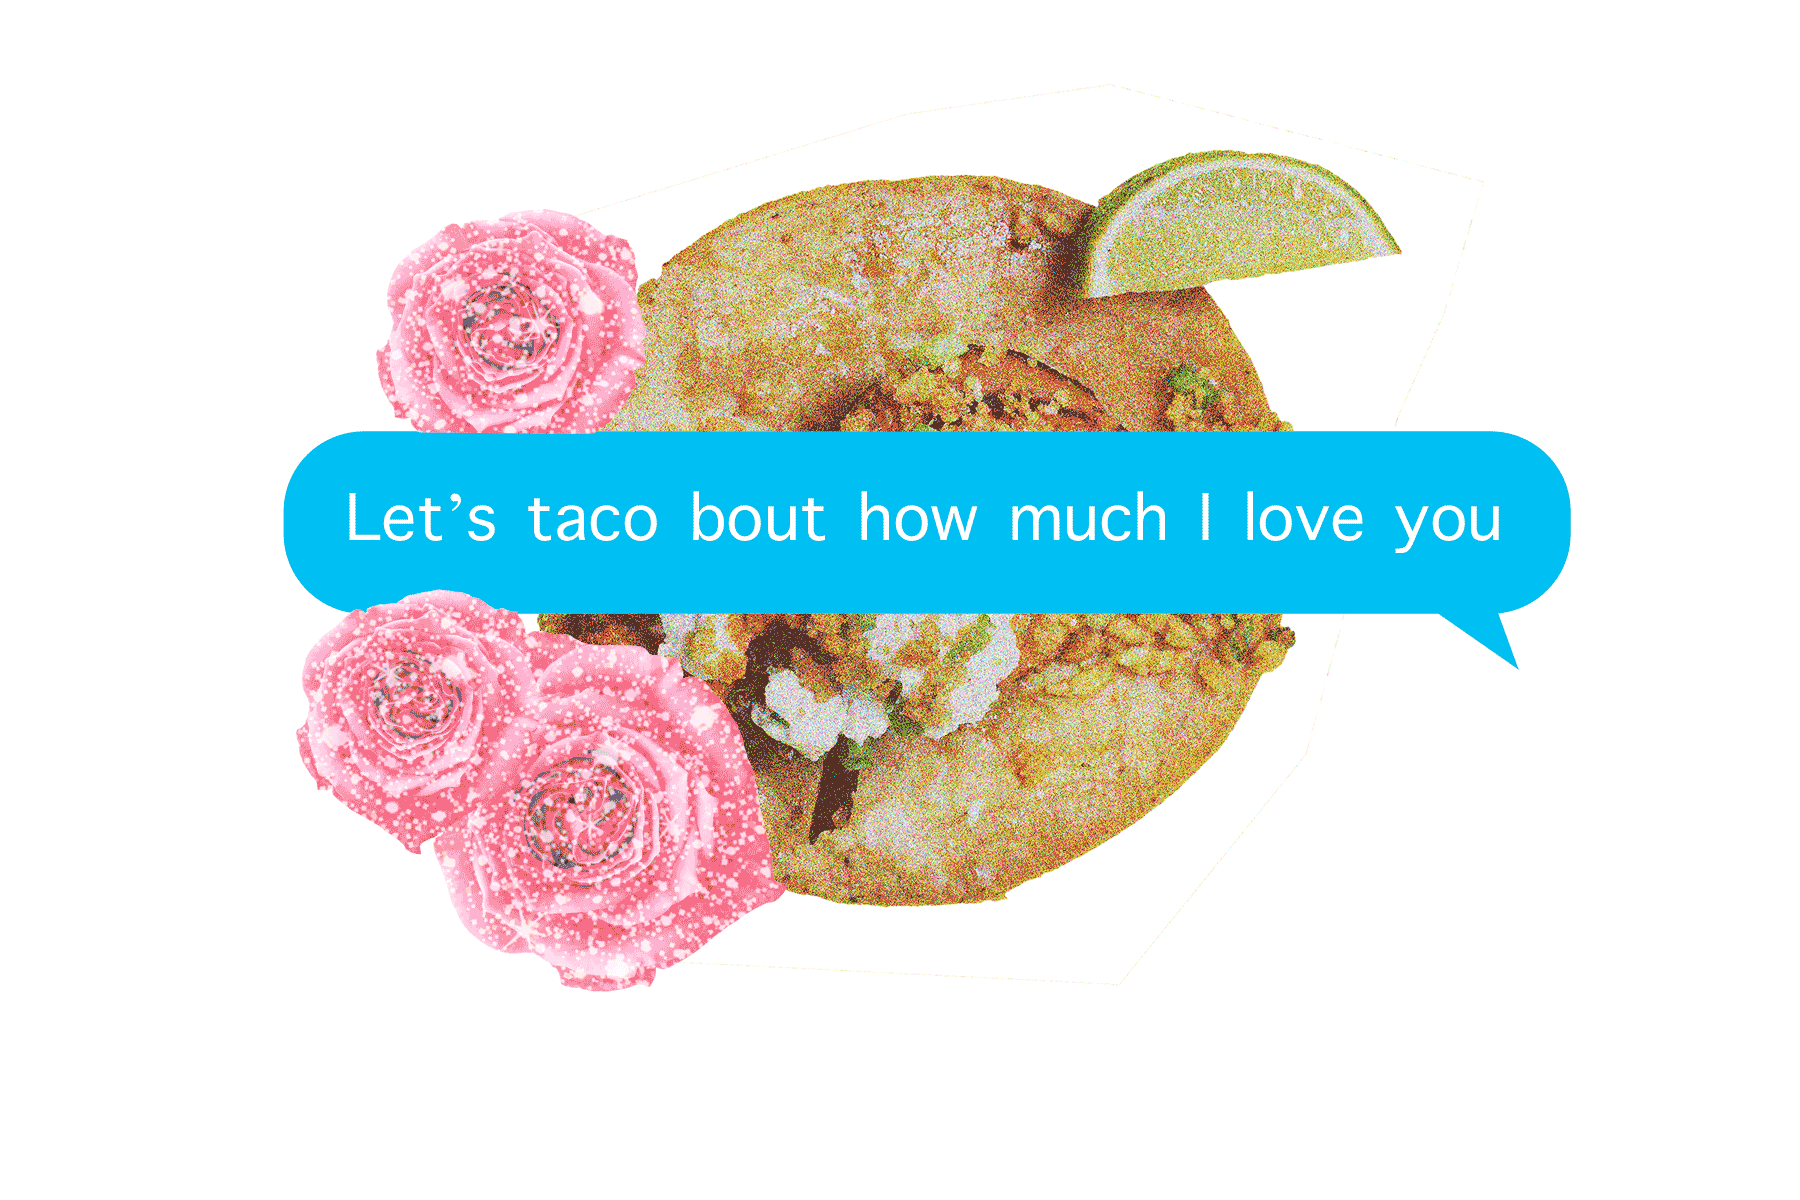 taco, sparkly roses and a text bubble: "Let's taco bout how much I love you"